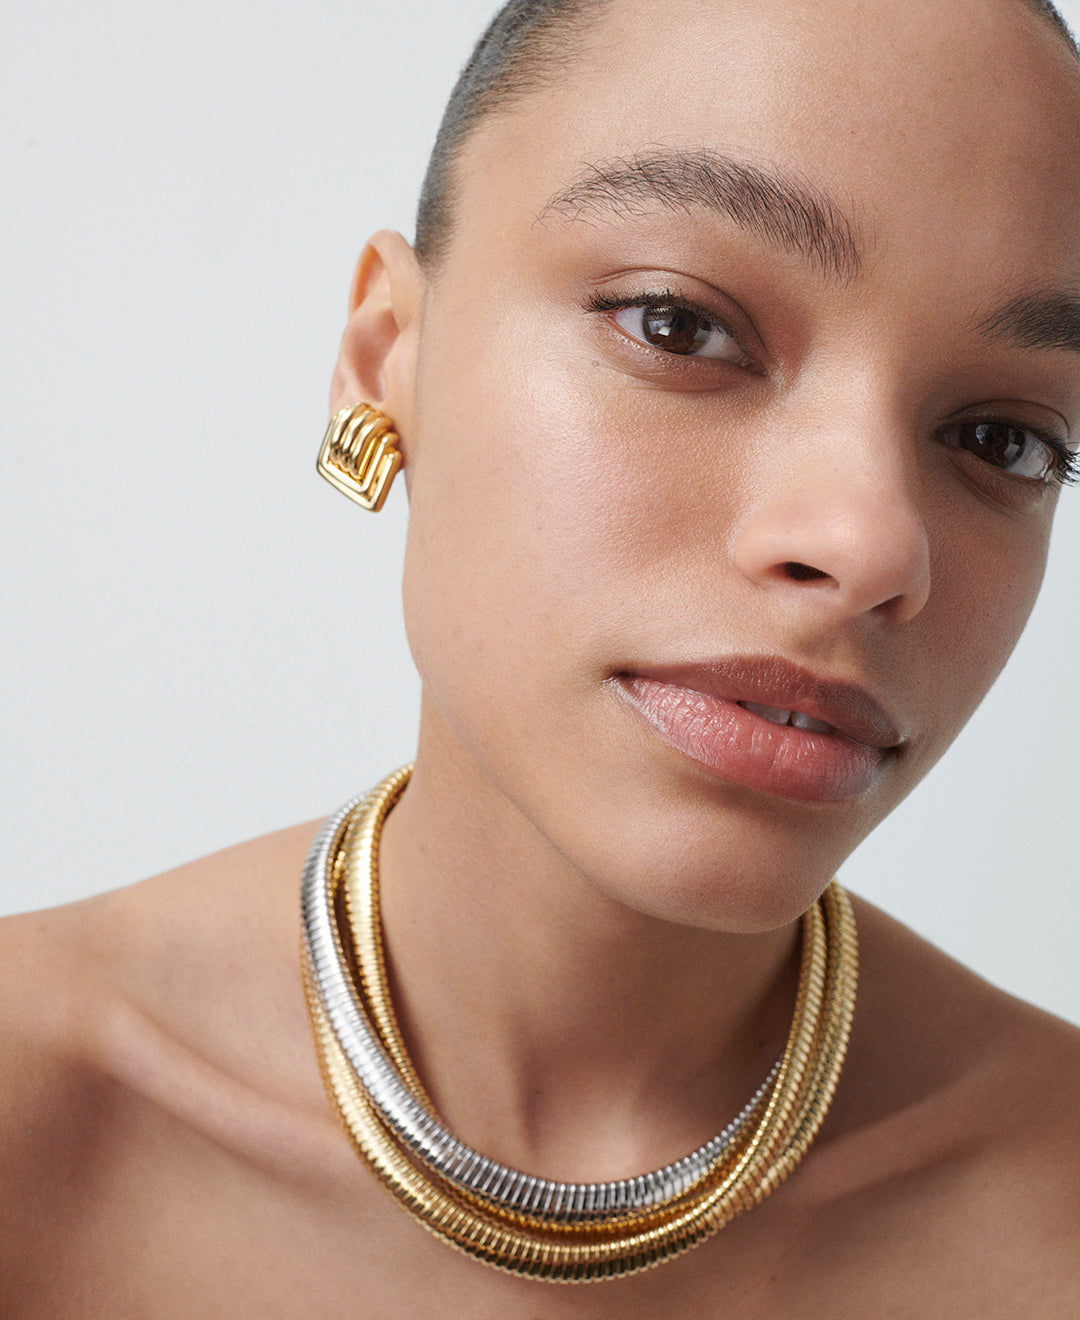 A model wearing yellow gold Square Earrings and a Tre Collana D'Oro Necklace in yellow gold, white gold and rose gold.